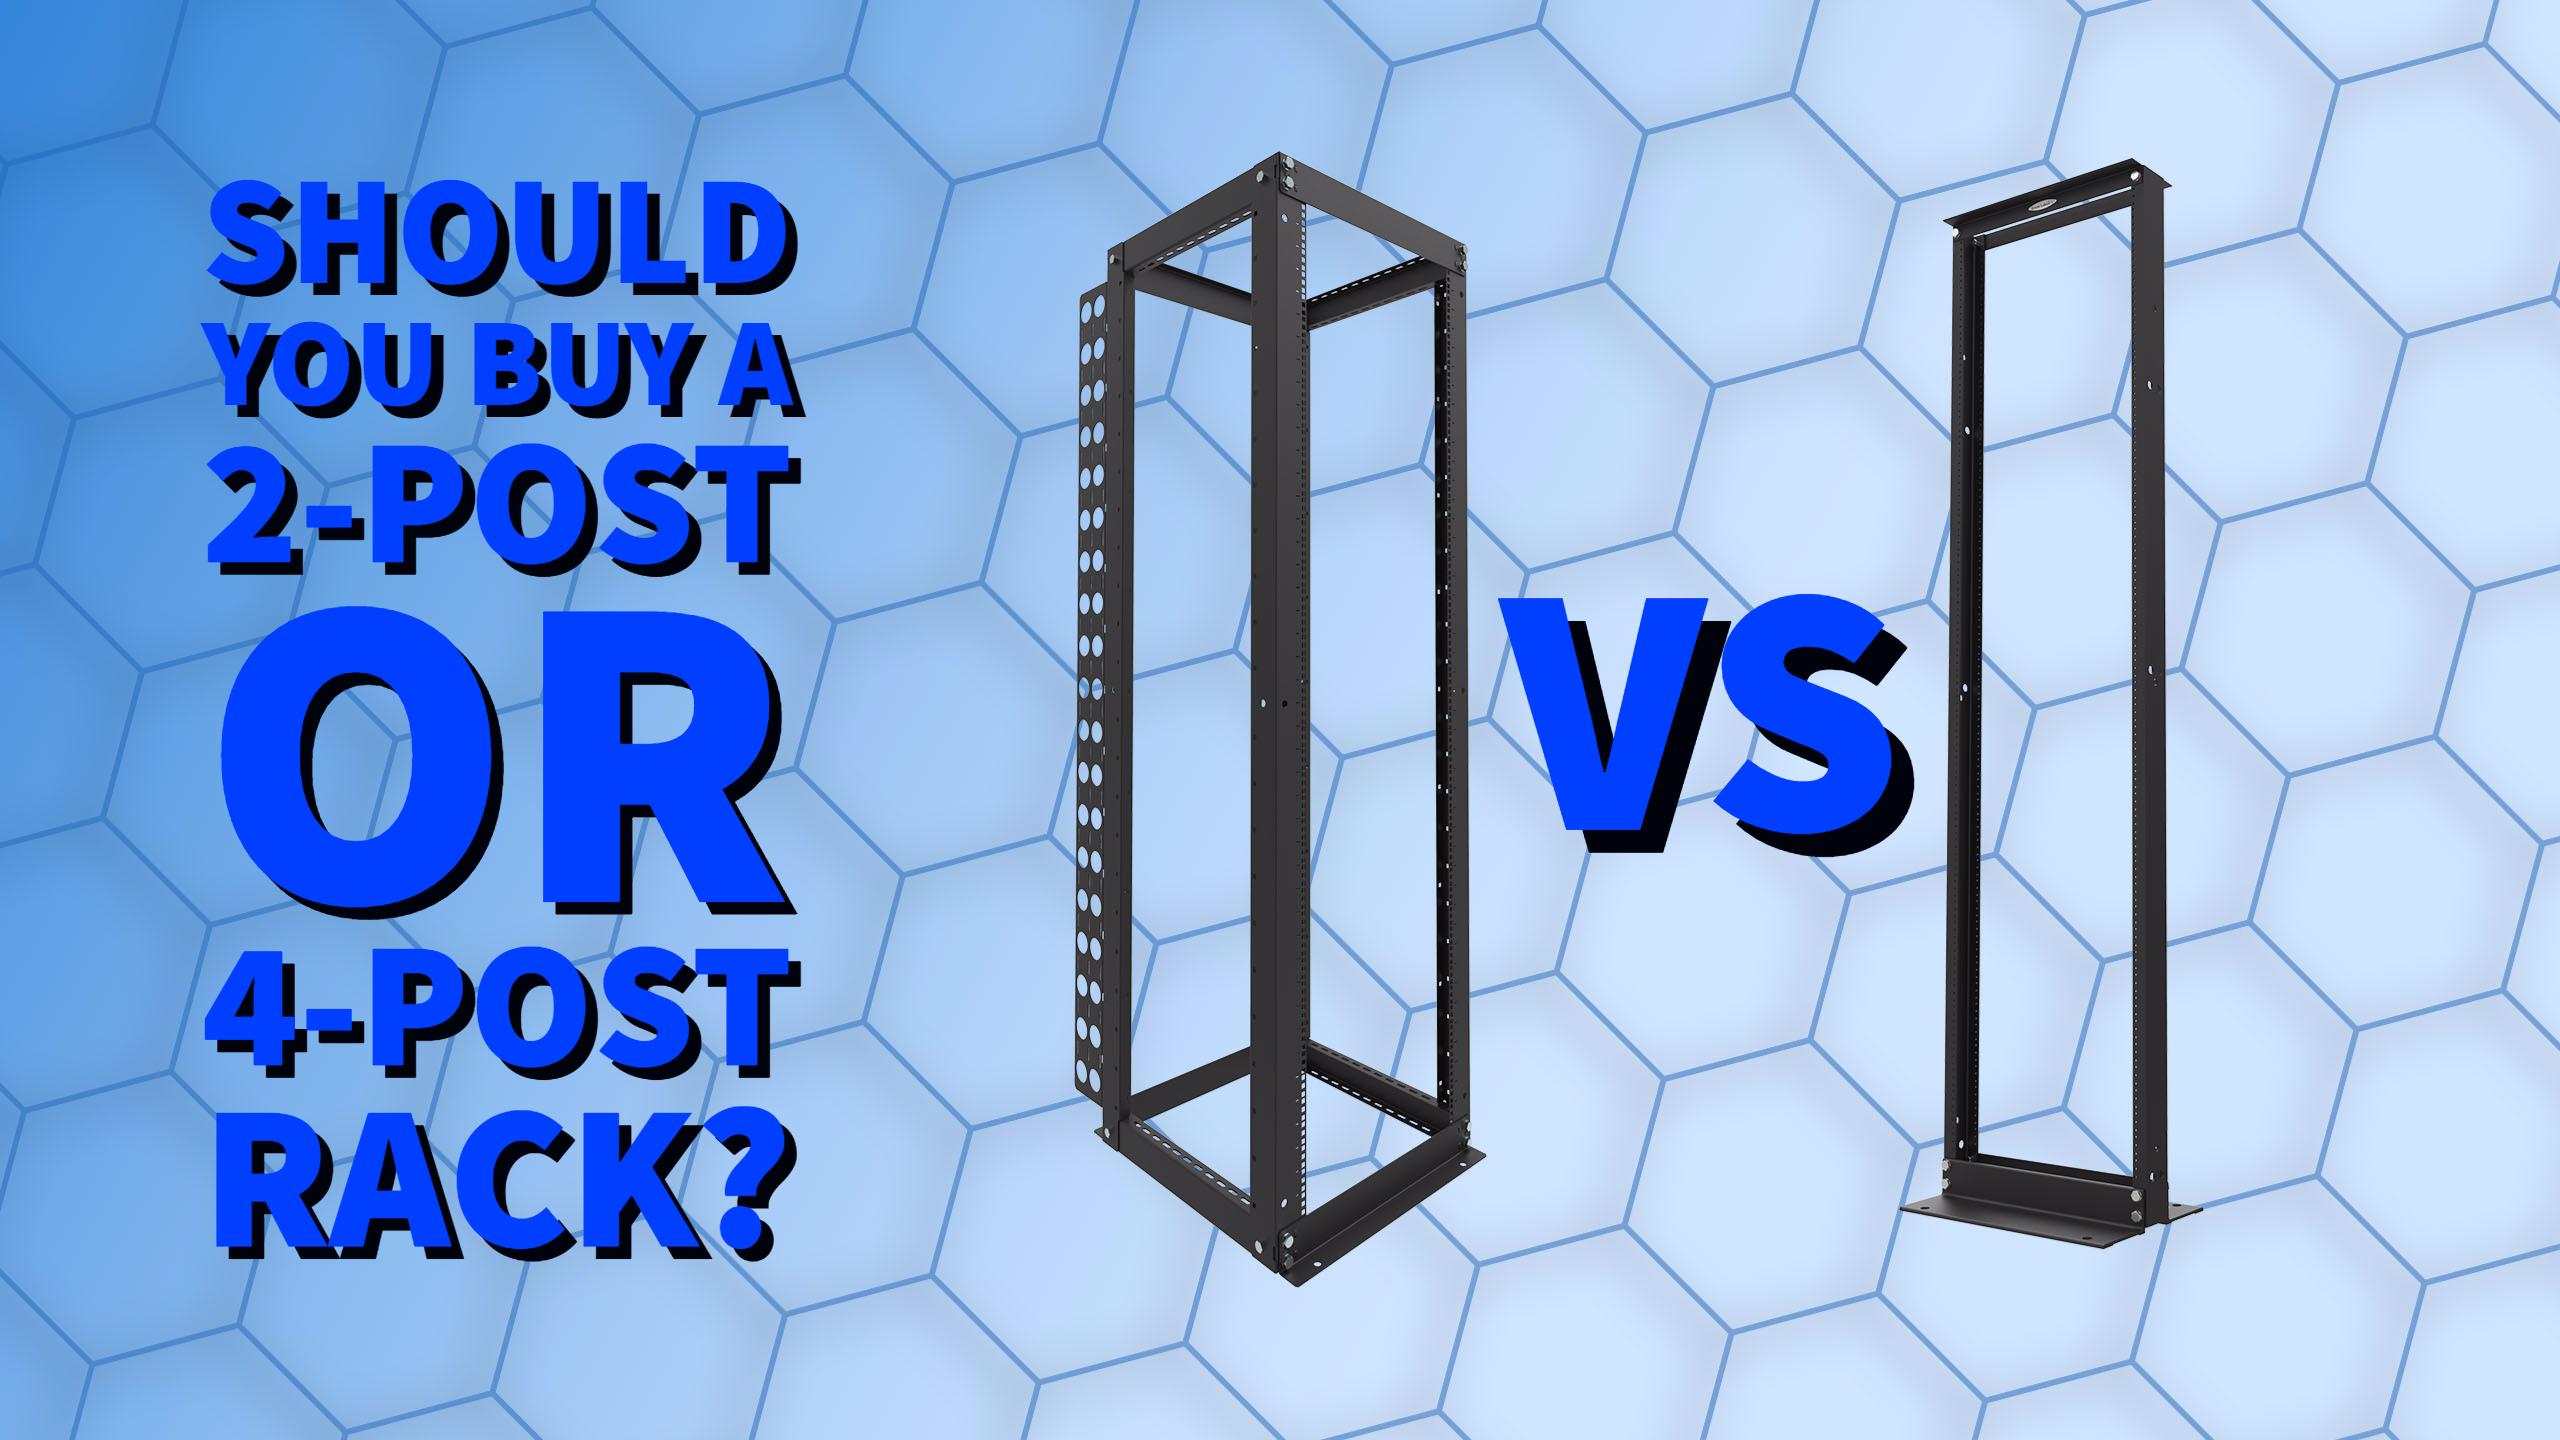 Should You Buy a 2Post Rack or 4Post Rack? RackSolutions